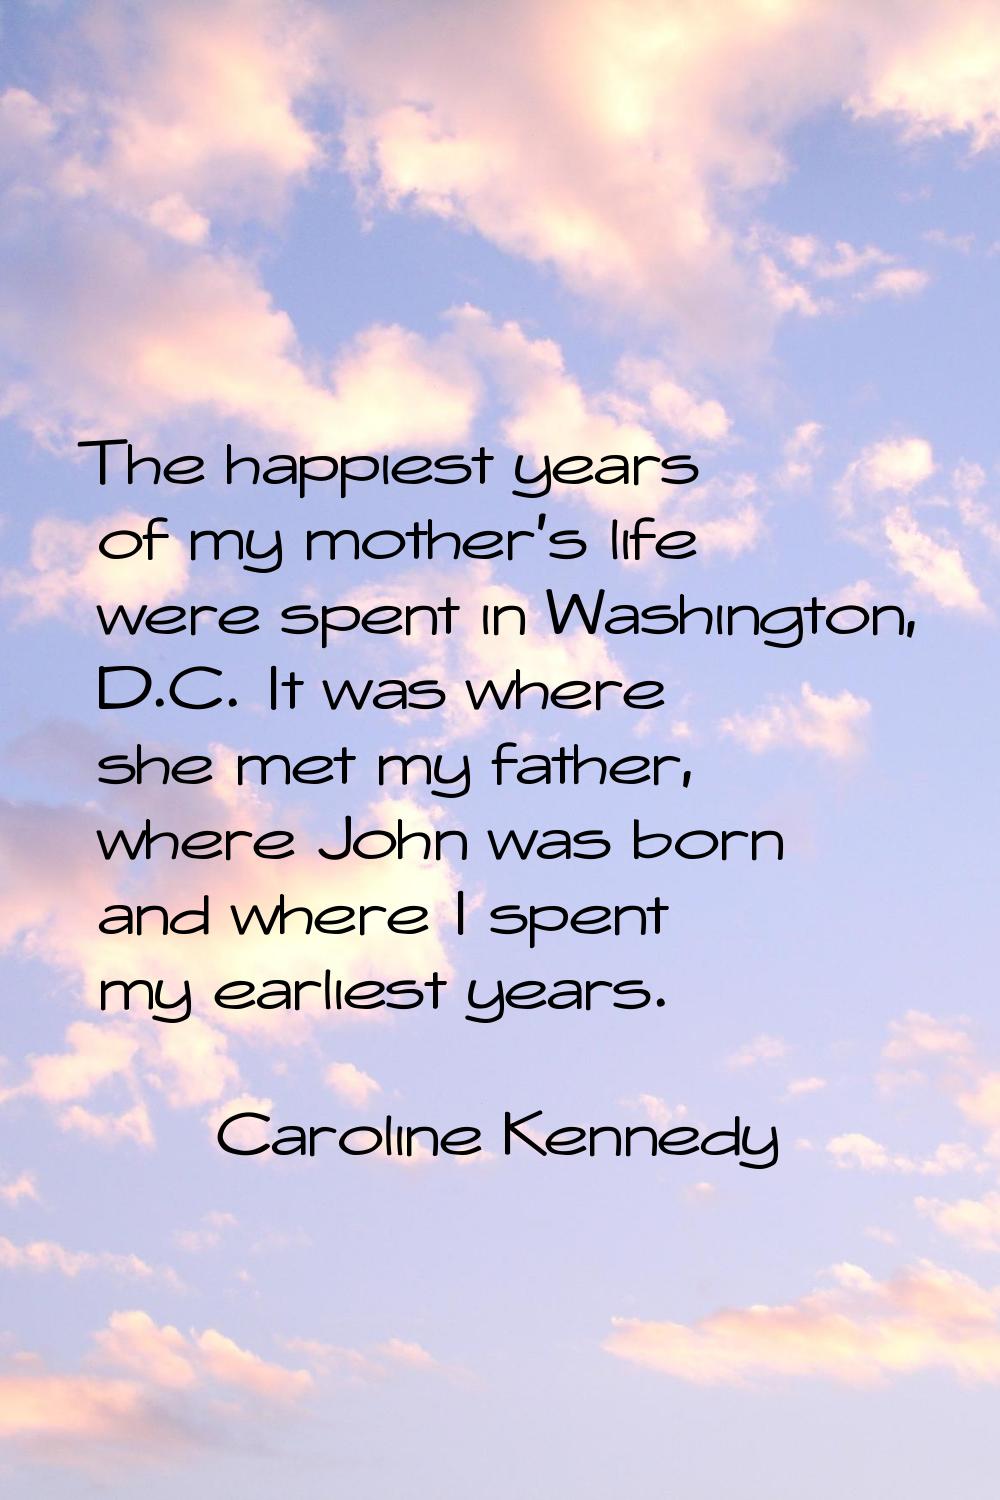 The happiest years of my mother's life were spent in Washington, D.C. It was where she met my fathe